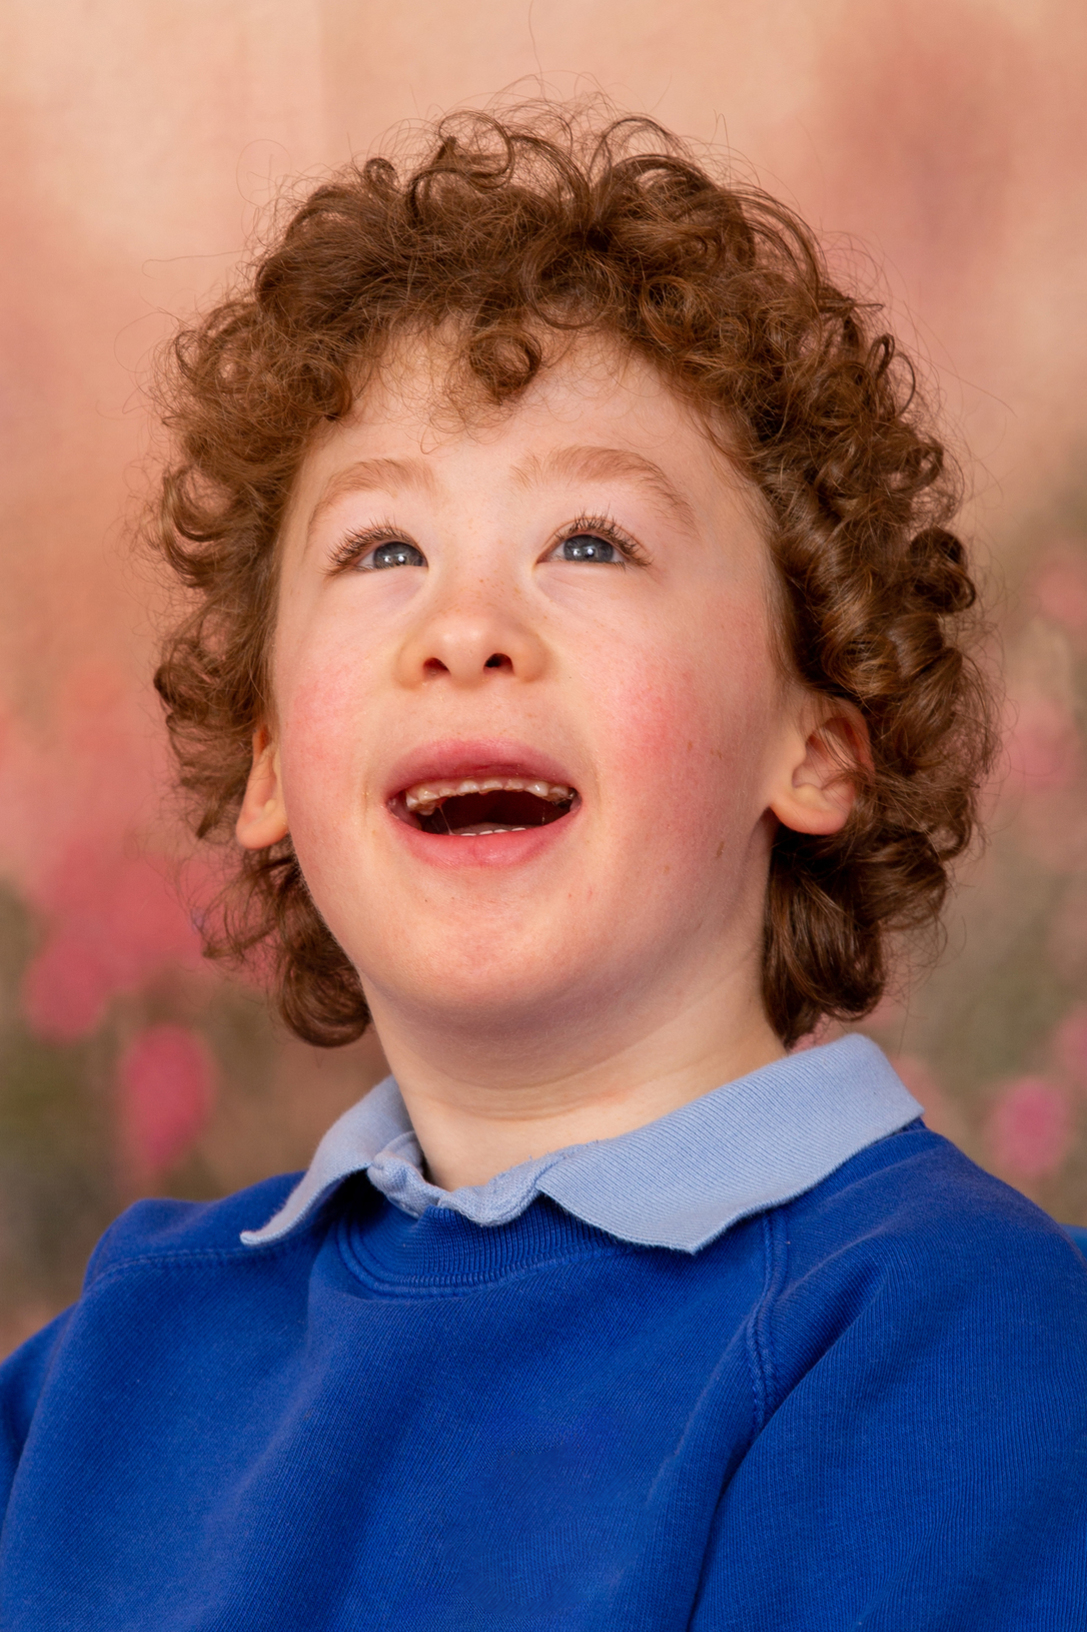 School photography session at a special needs school in Hertfordshire